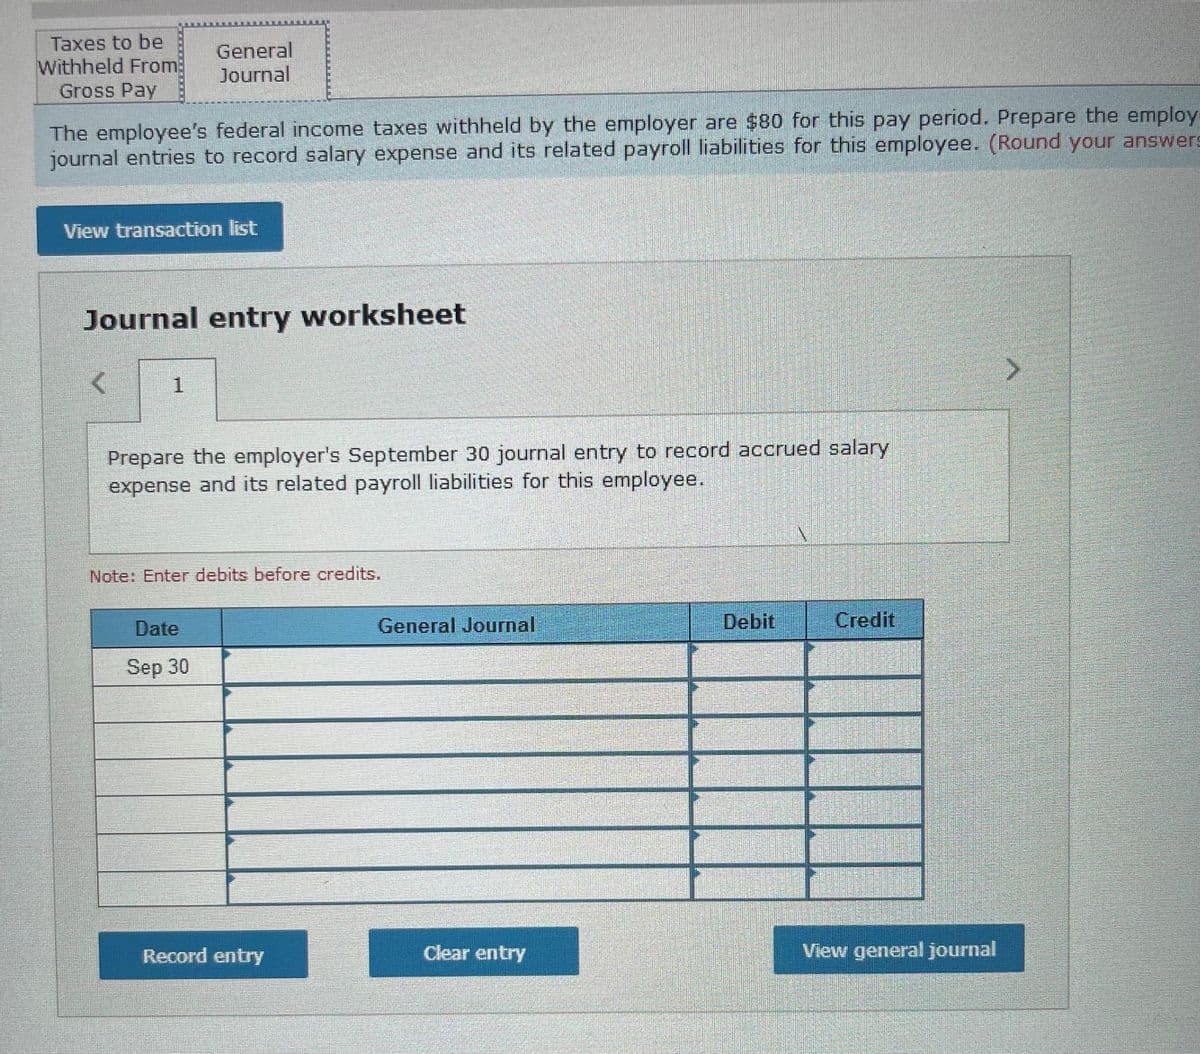 Taxes to be
Withheld From
Gross Pay
General
Journal
The employee's federal income taxes withheld by the employer are $80 for this pay period. Prepare the employ
journal entries to record salary expense and its related payroll liabilities for this employee. (Round your answers
View transaction list
Journal entry worksheet
1
Prepare the employer's September 30 journal entry to record accrued salary
expense and its related payroll liabilities for this employee.
Note: Enter debits before credits.
Date
General Journal
Debit
Credit
Sep 30
Record entry
Clear entry
View general journal
